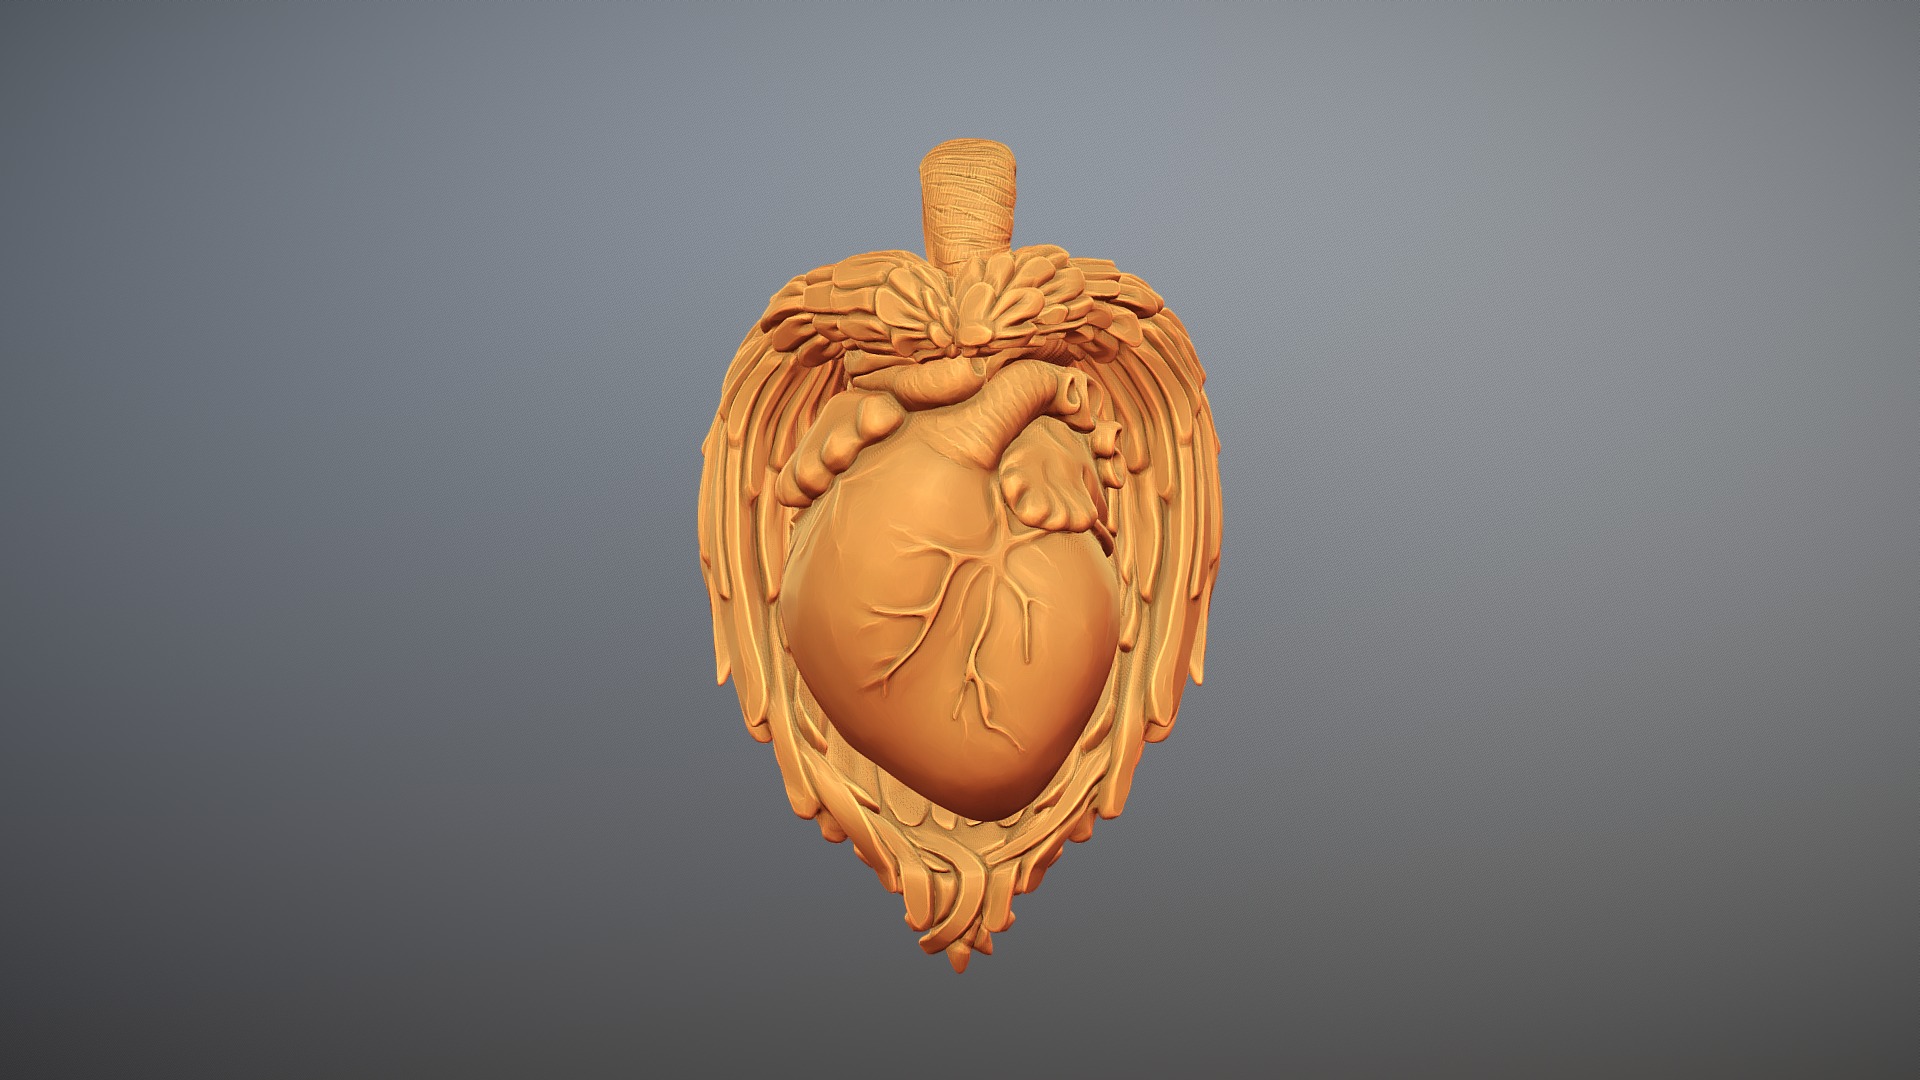 3D model Love with the heart surrounded by angel wings - This is a 3D model of the Love with the heart surrounded by angel wings. The 3D model is about a carved pumpkin with a face.